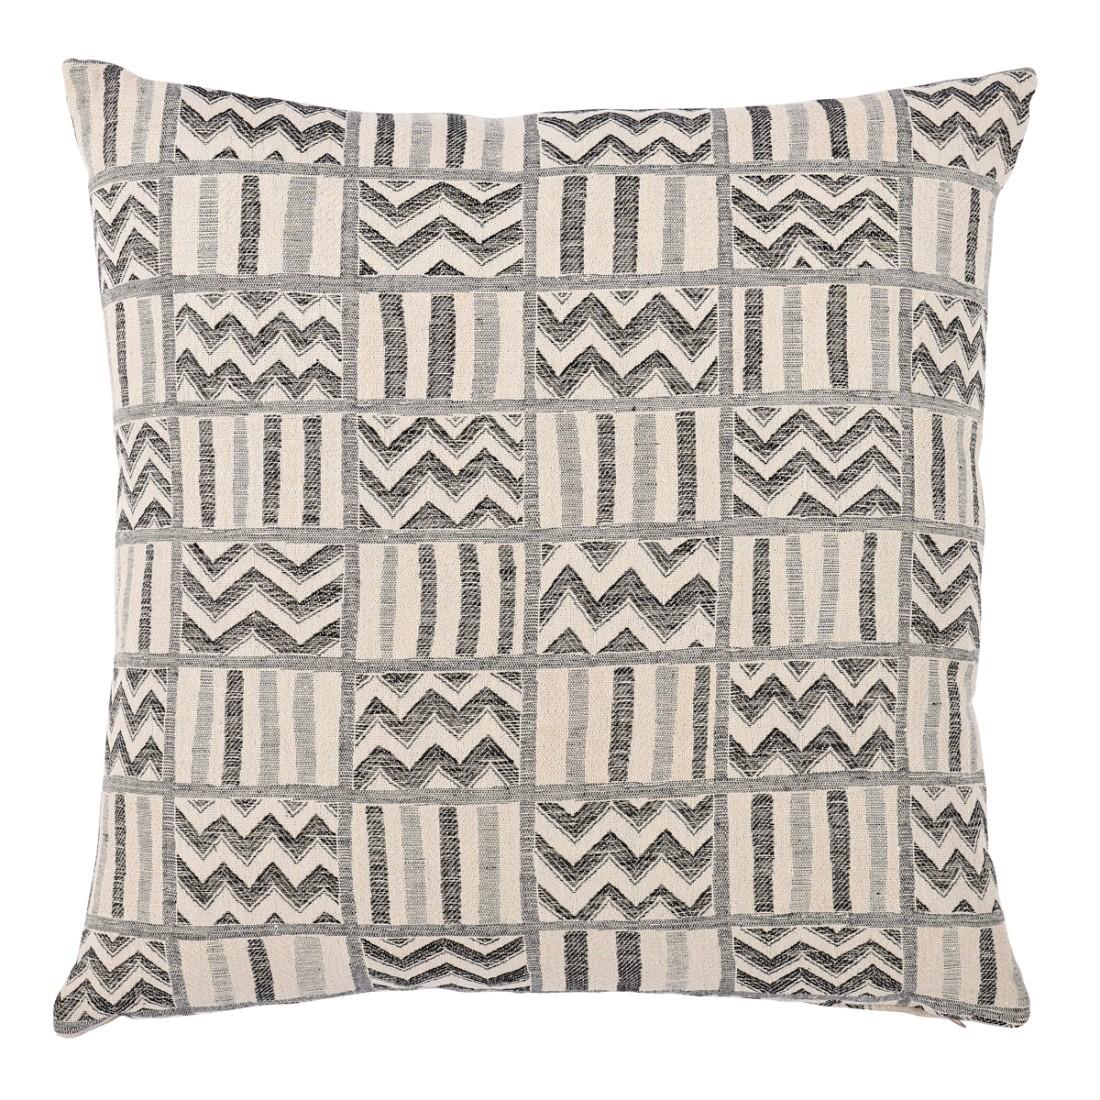 This pillow features Kudu Stripe on the front, and Kudu on the back with a knife edge finish. Kudu’s irregular patchwork of chevrons and stripes recall the beaches of Borneo and Java. A companion to Kudu Stripe, this exceptional woven linen fabric